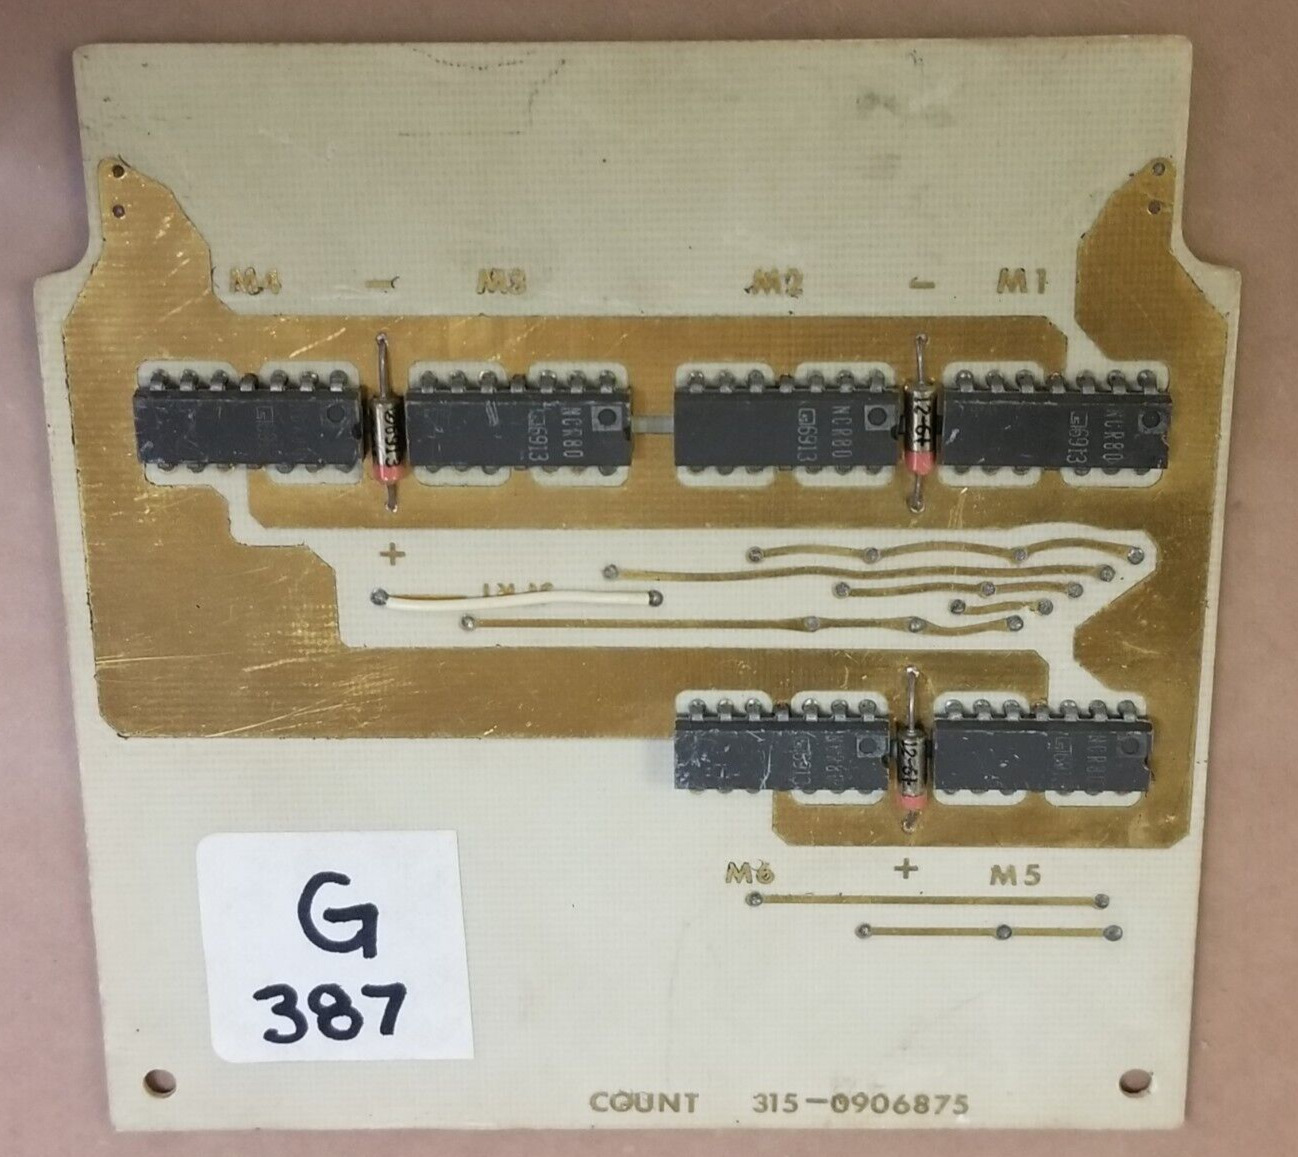 VERY RARE 1968 NCR Century 100 Count Card GOLD PLATED PCB 315-0906875 #G387